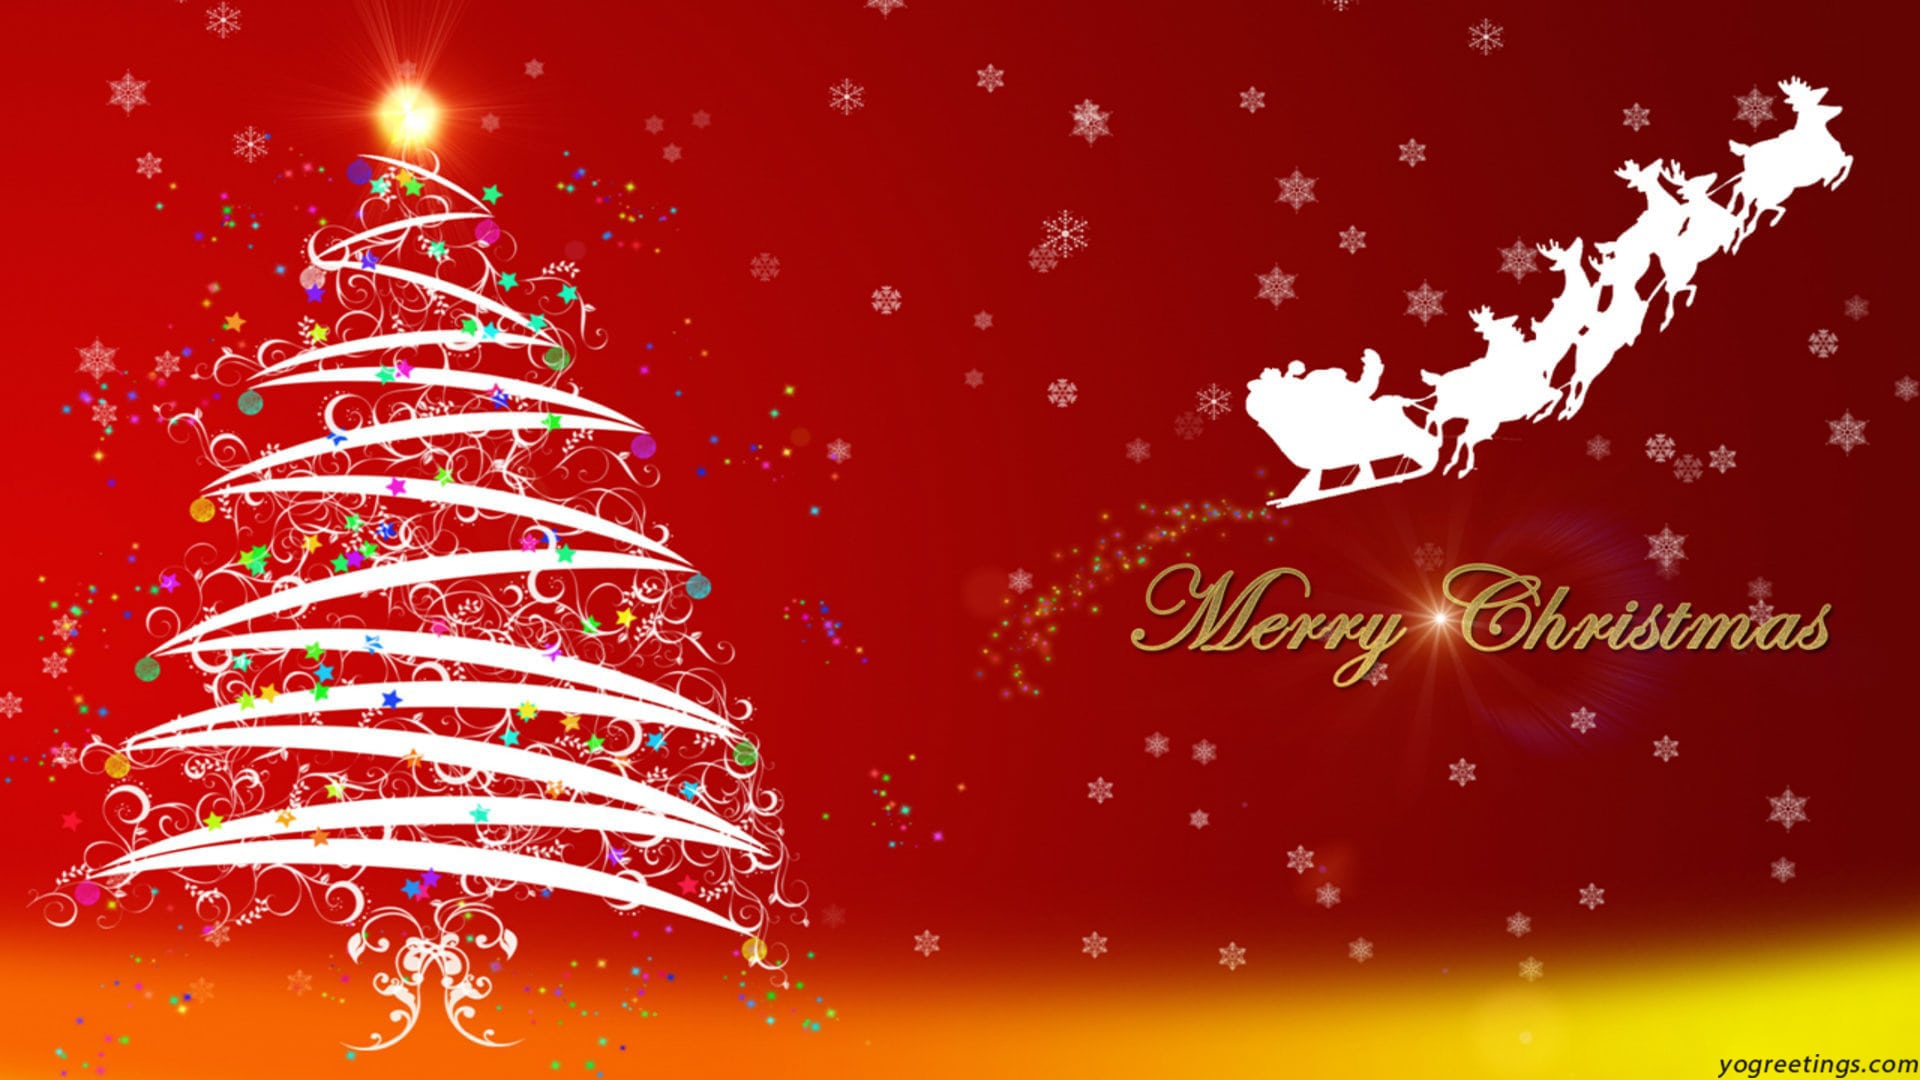 Merry Christmas Wallpaper Full HD Free Download - Images 13